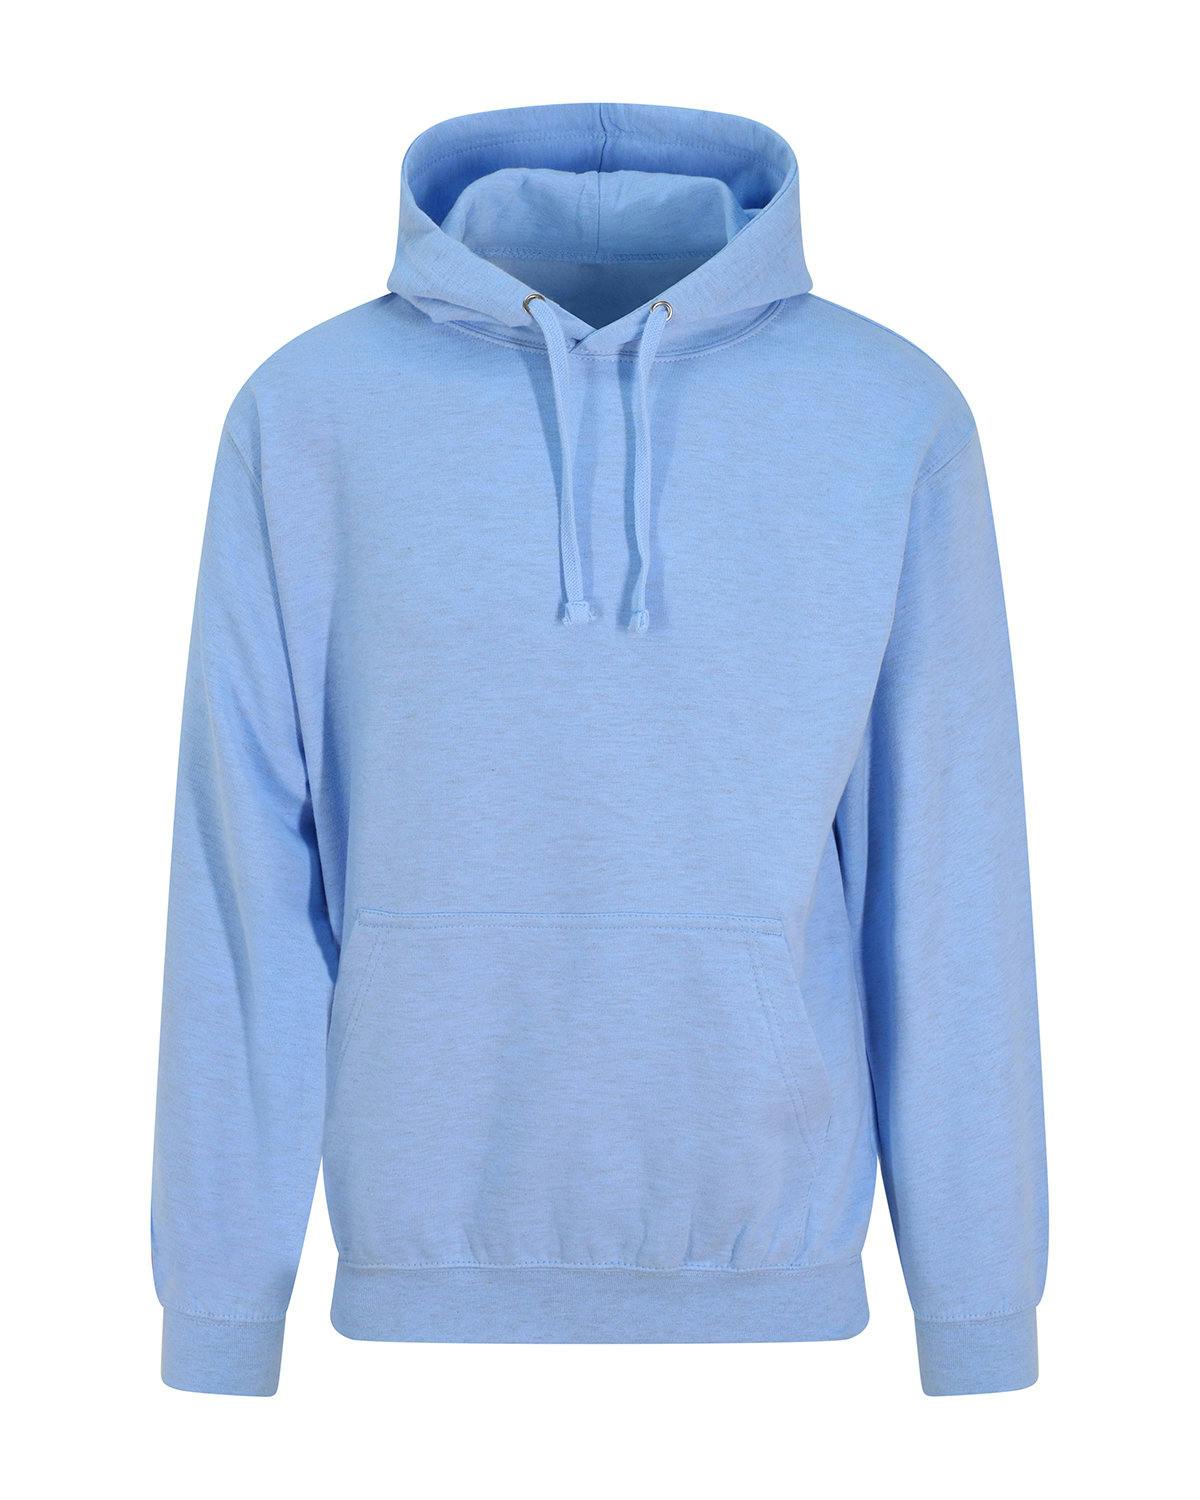 Image for Adult Surf Collection Hooded Fleece